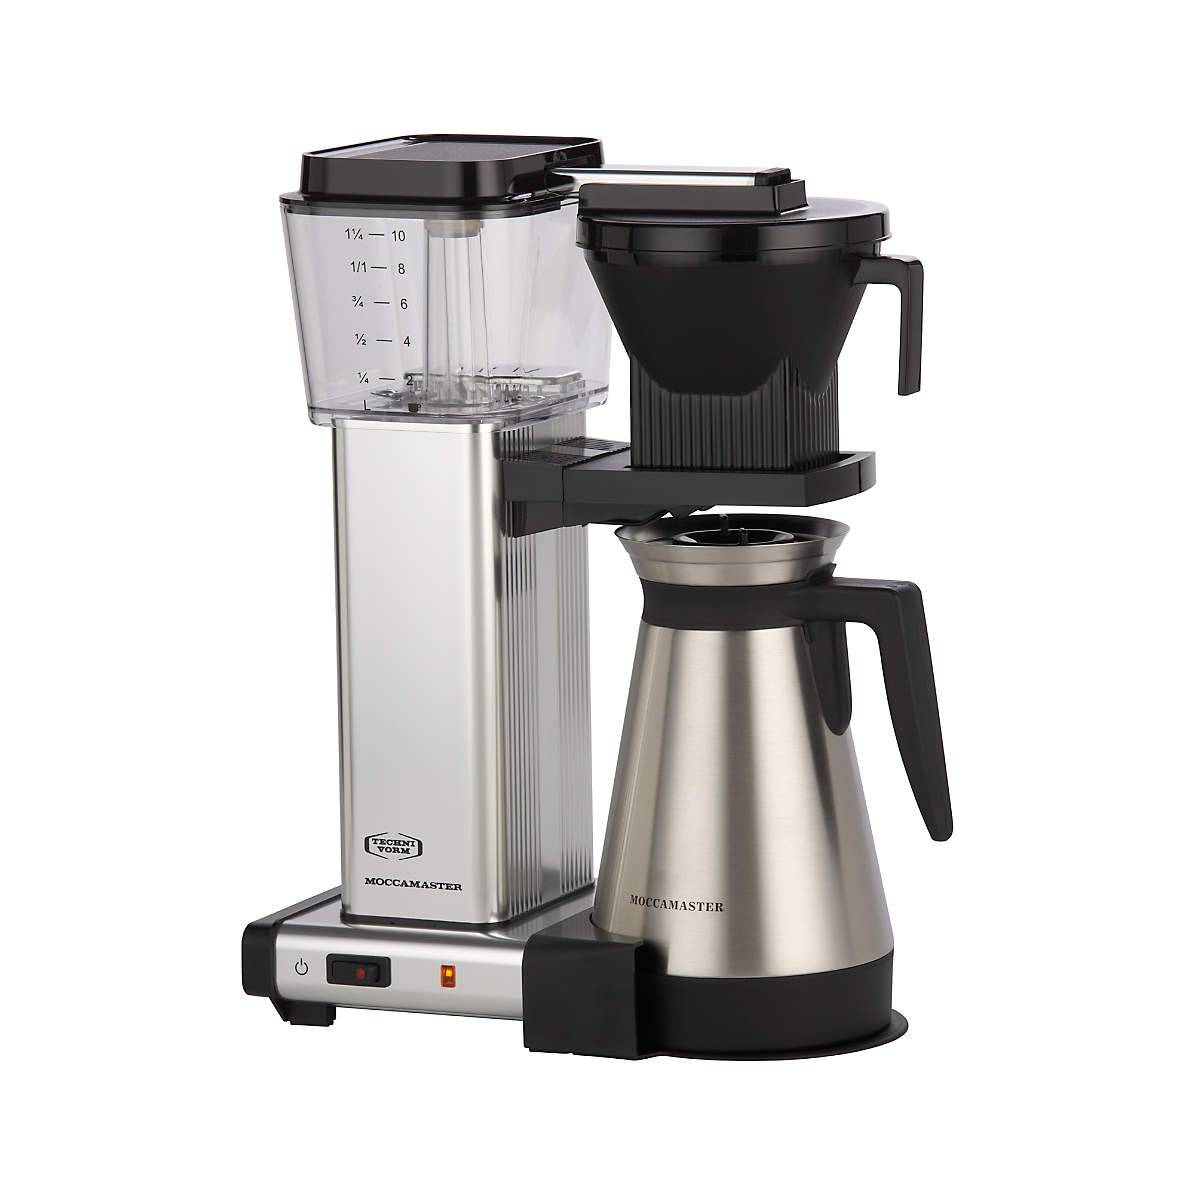 Moccamaster Thermal Brewer 10-Cup Polished Silver Coffee Maker + Reviews |